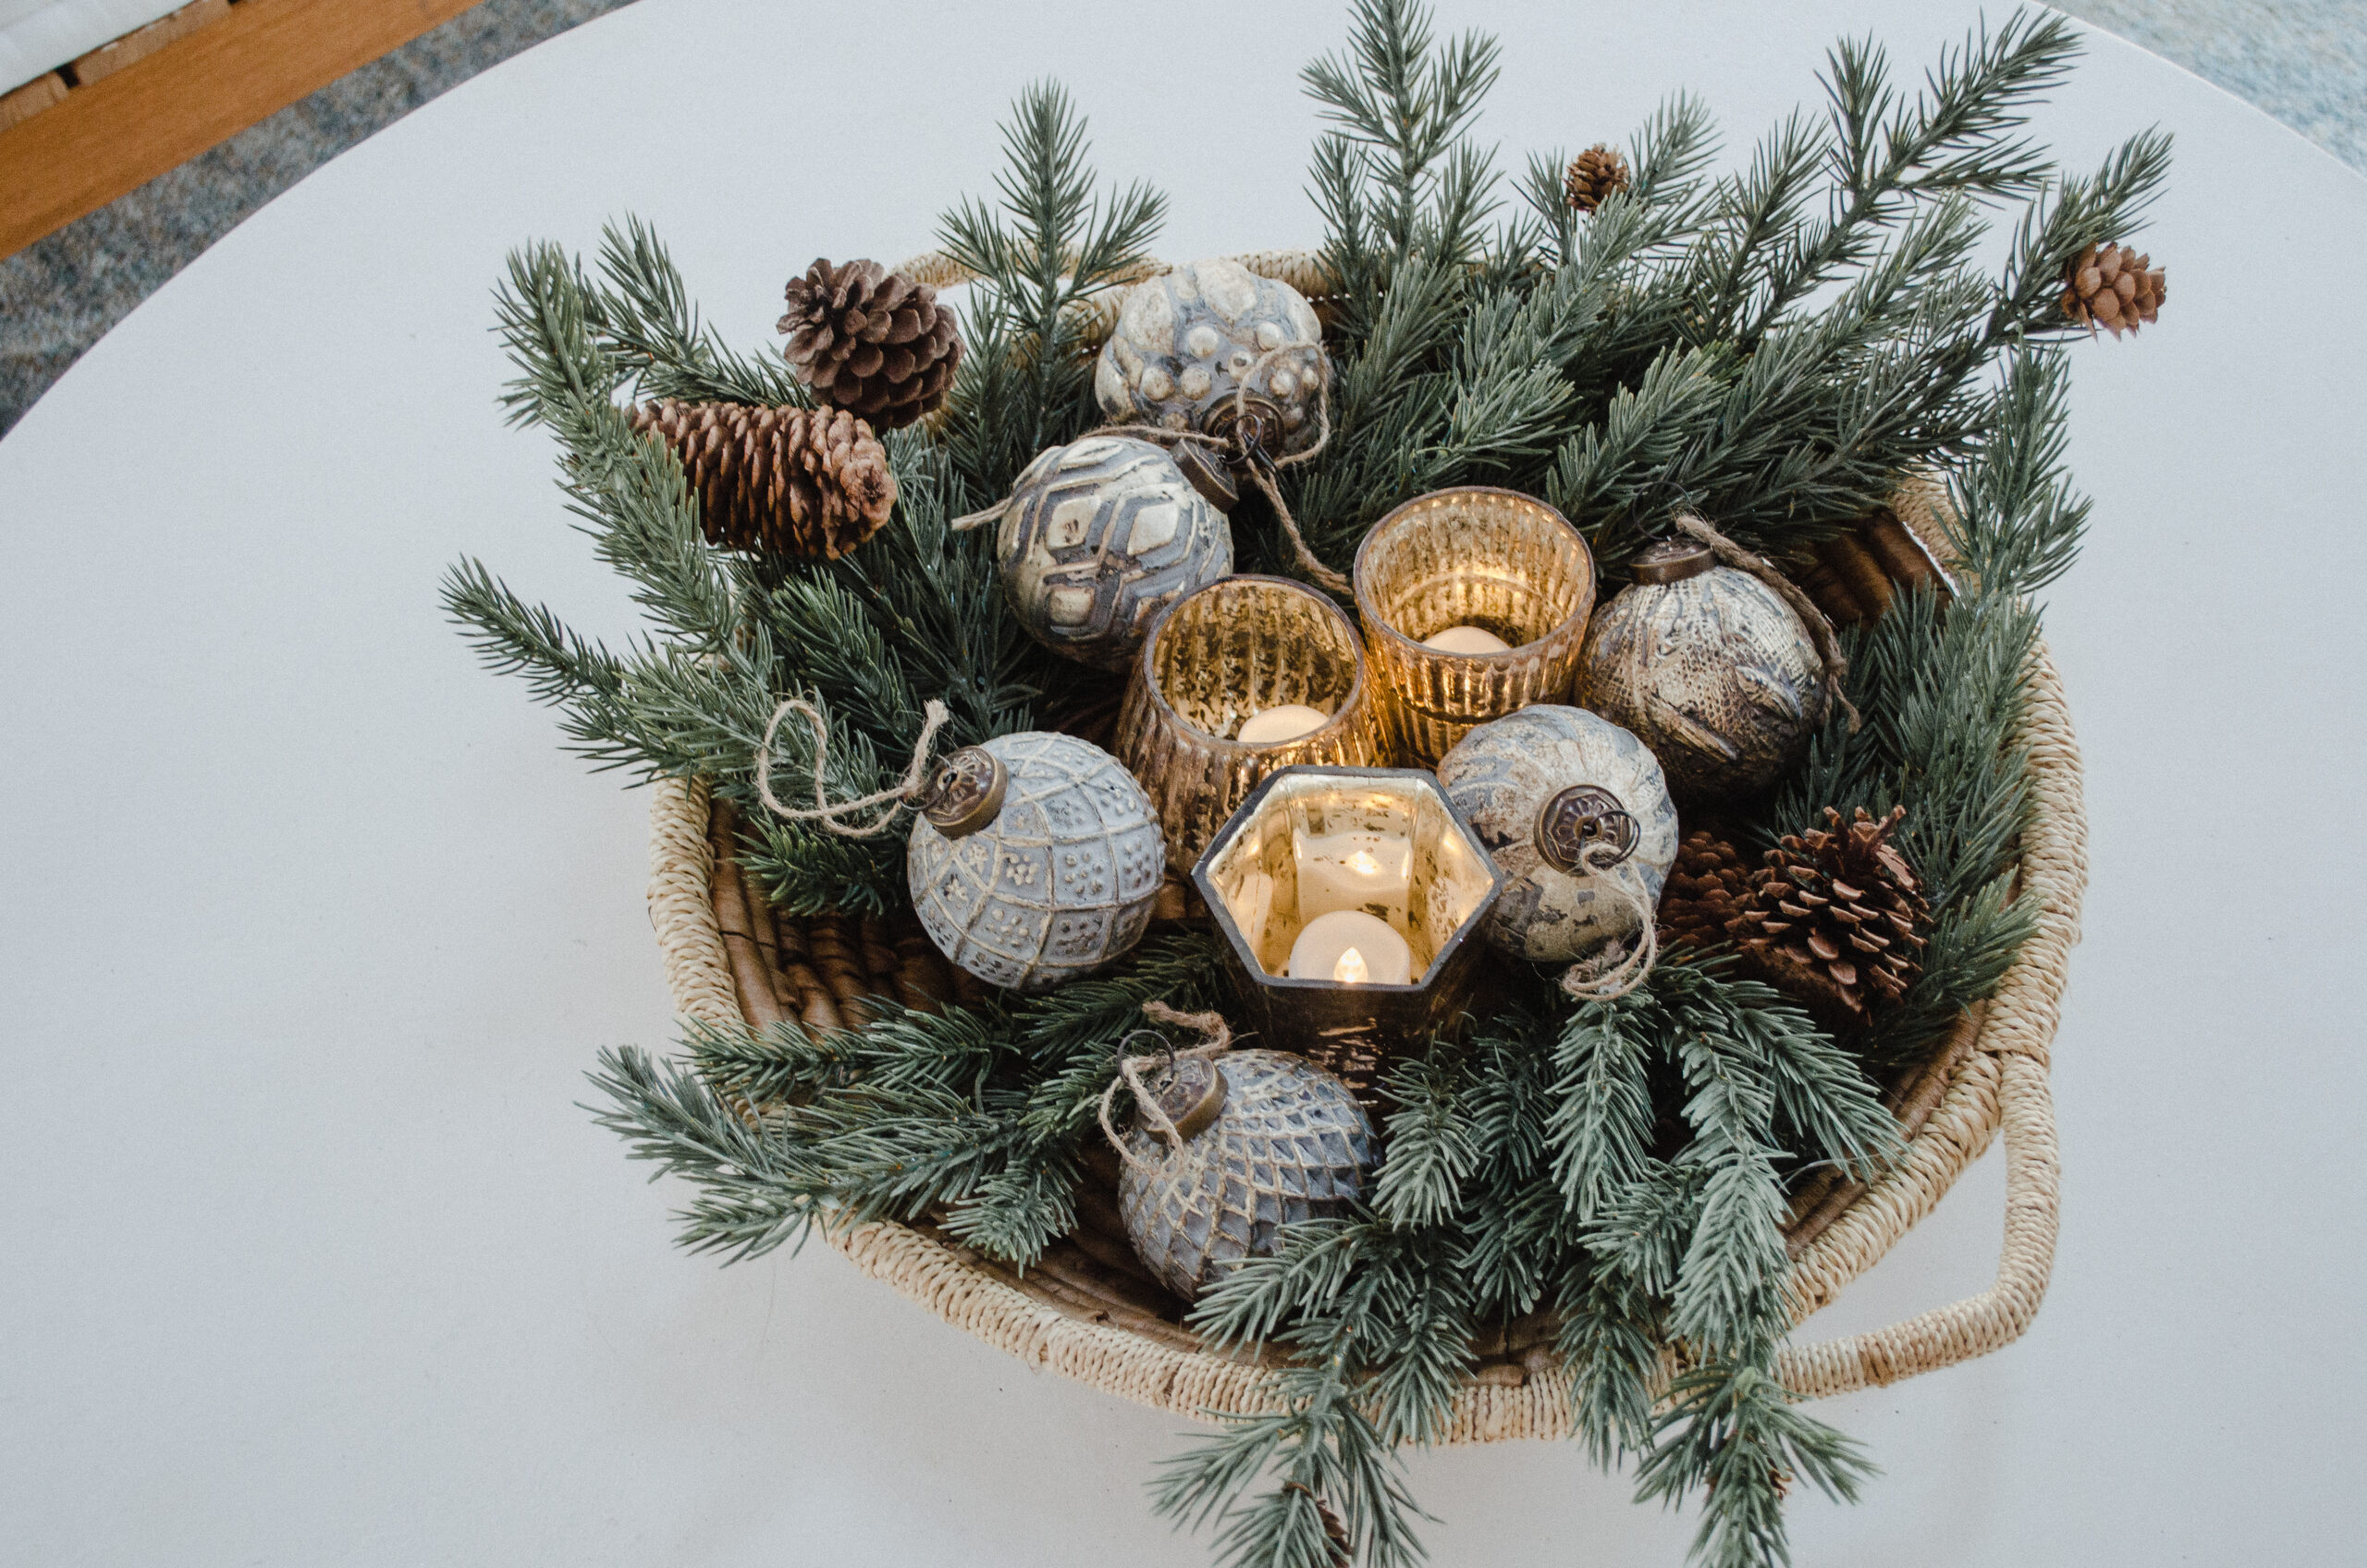 Connecticut life style blogger Lauren McBride shares a photo of her Enchanted Forest Christmas decor.